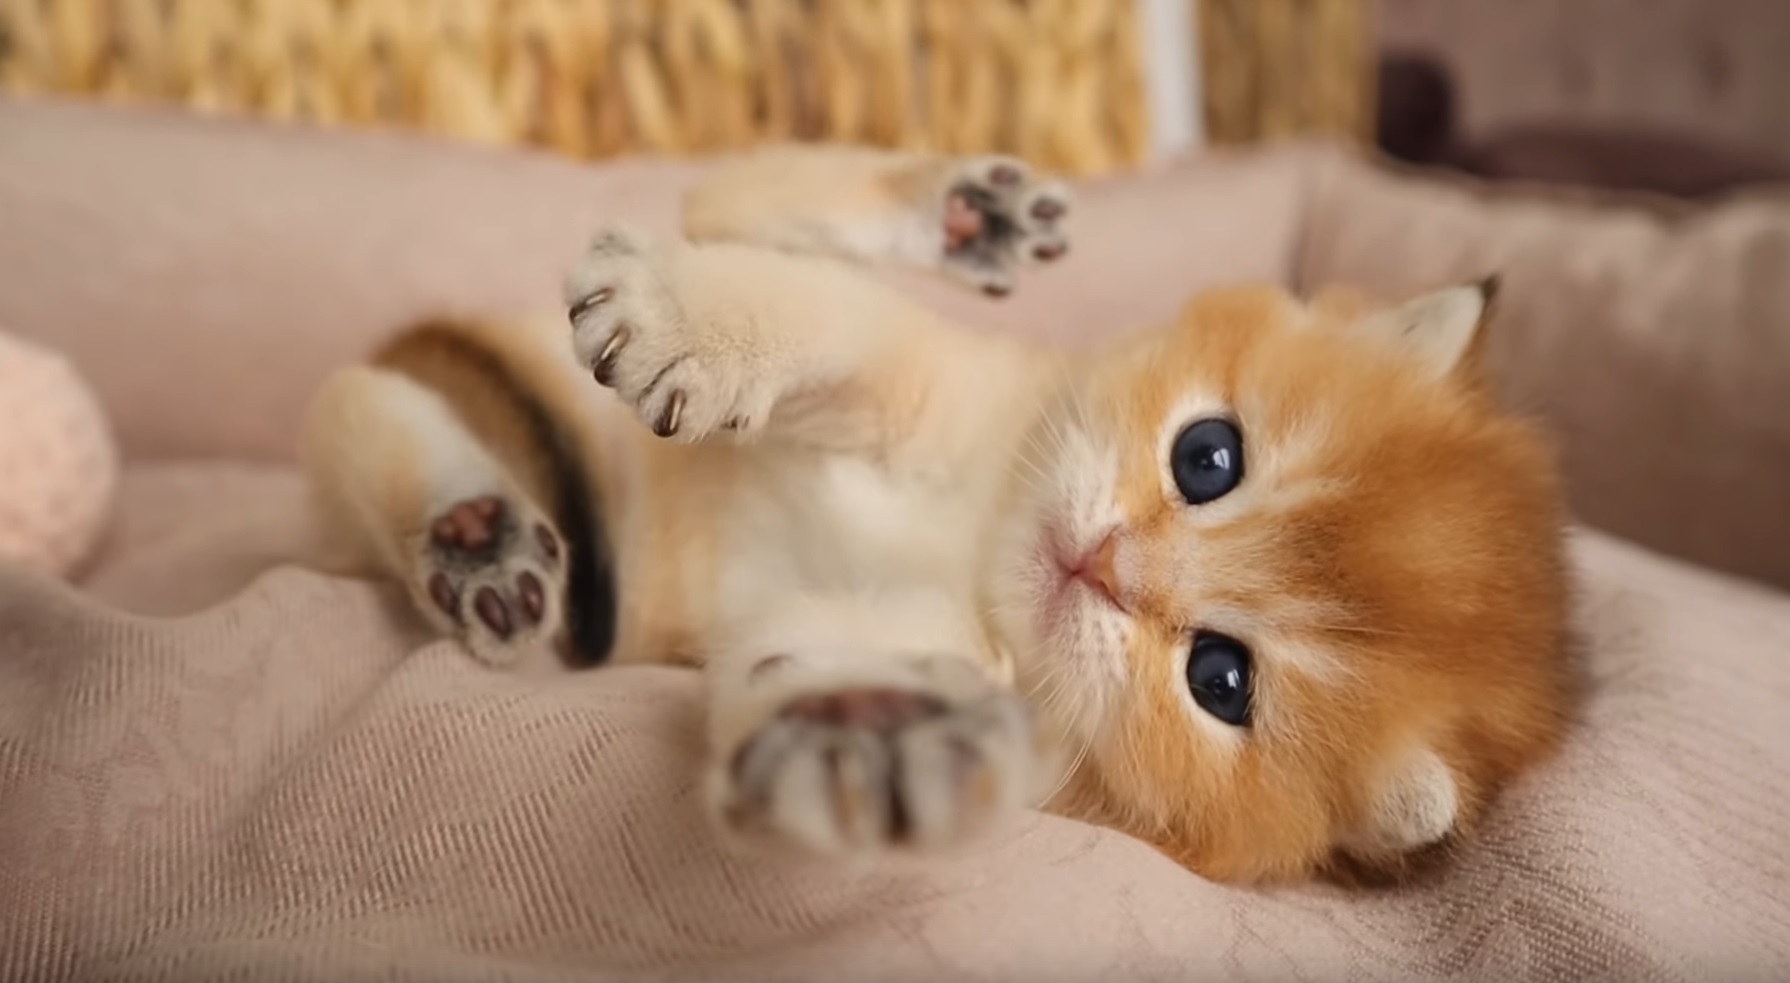 Kitten Has The Cutest Paws